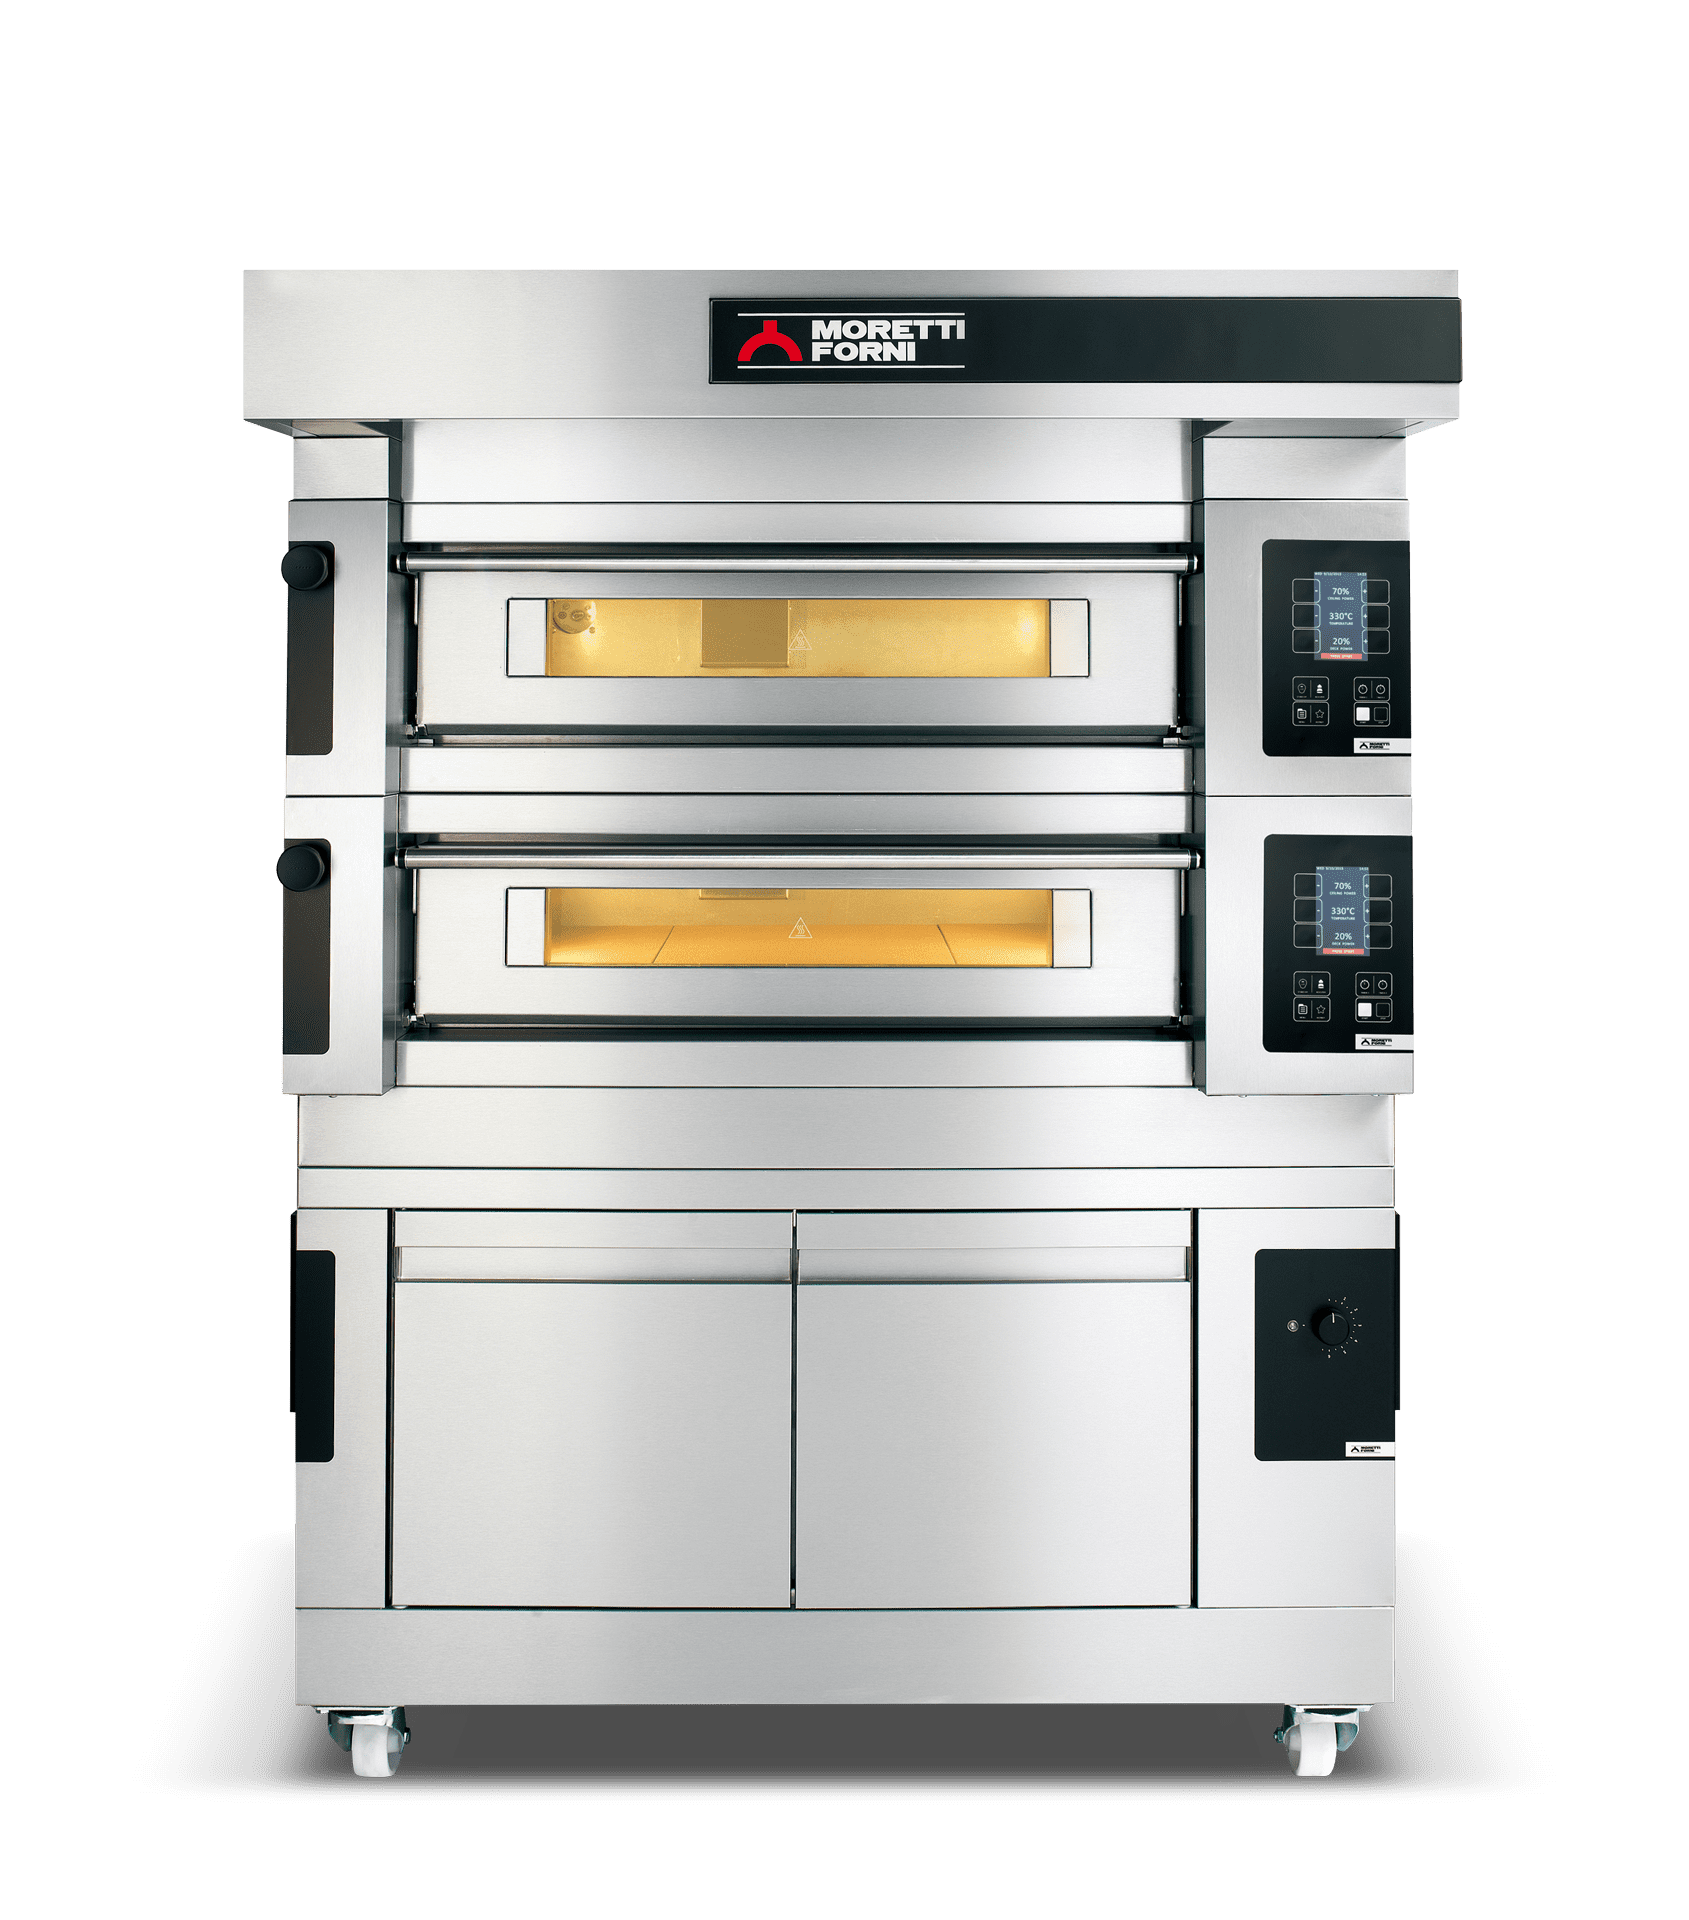 Serie S – Double Deck Baking Oven on Prover